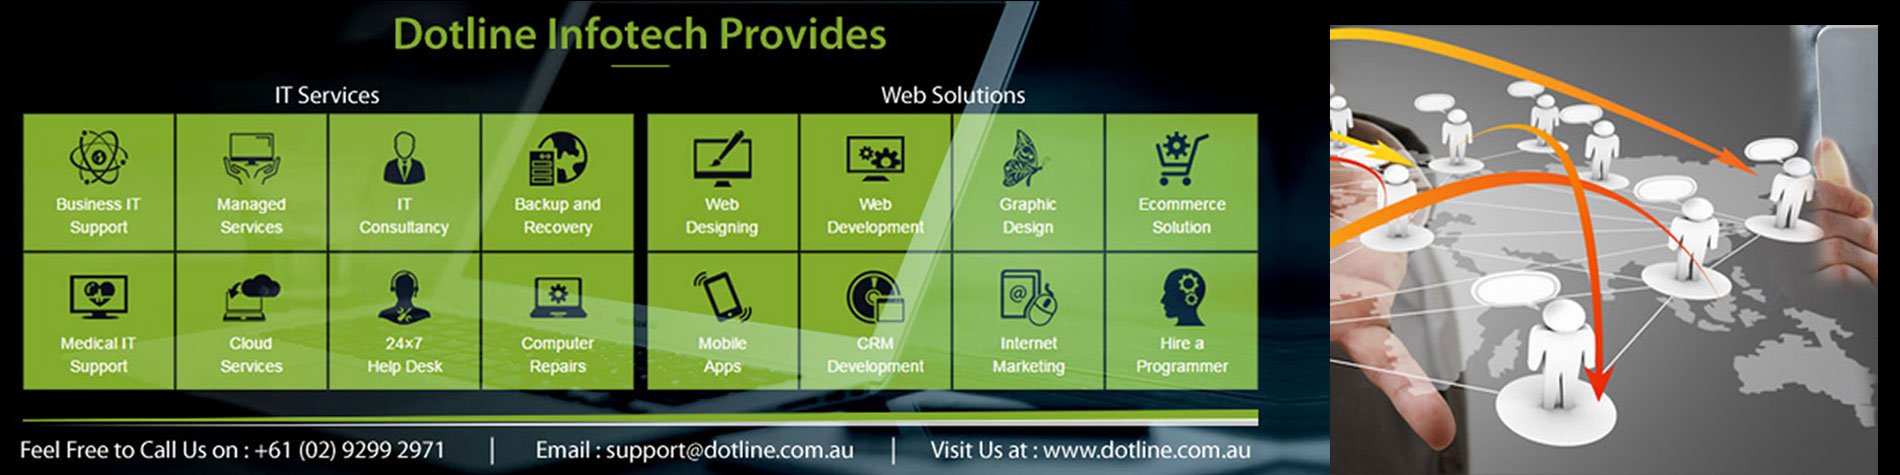 Dotline Infotech an IT Support Company in Sydney cover